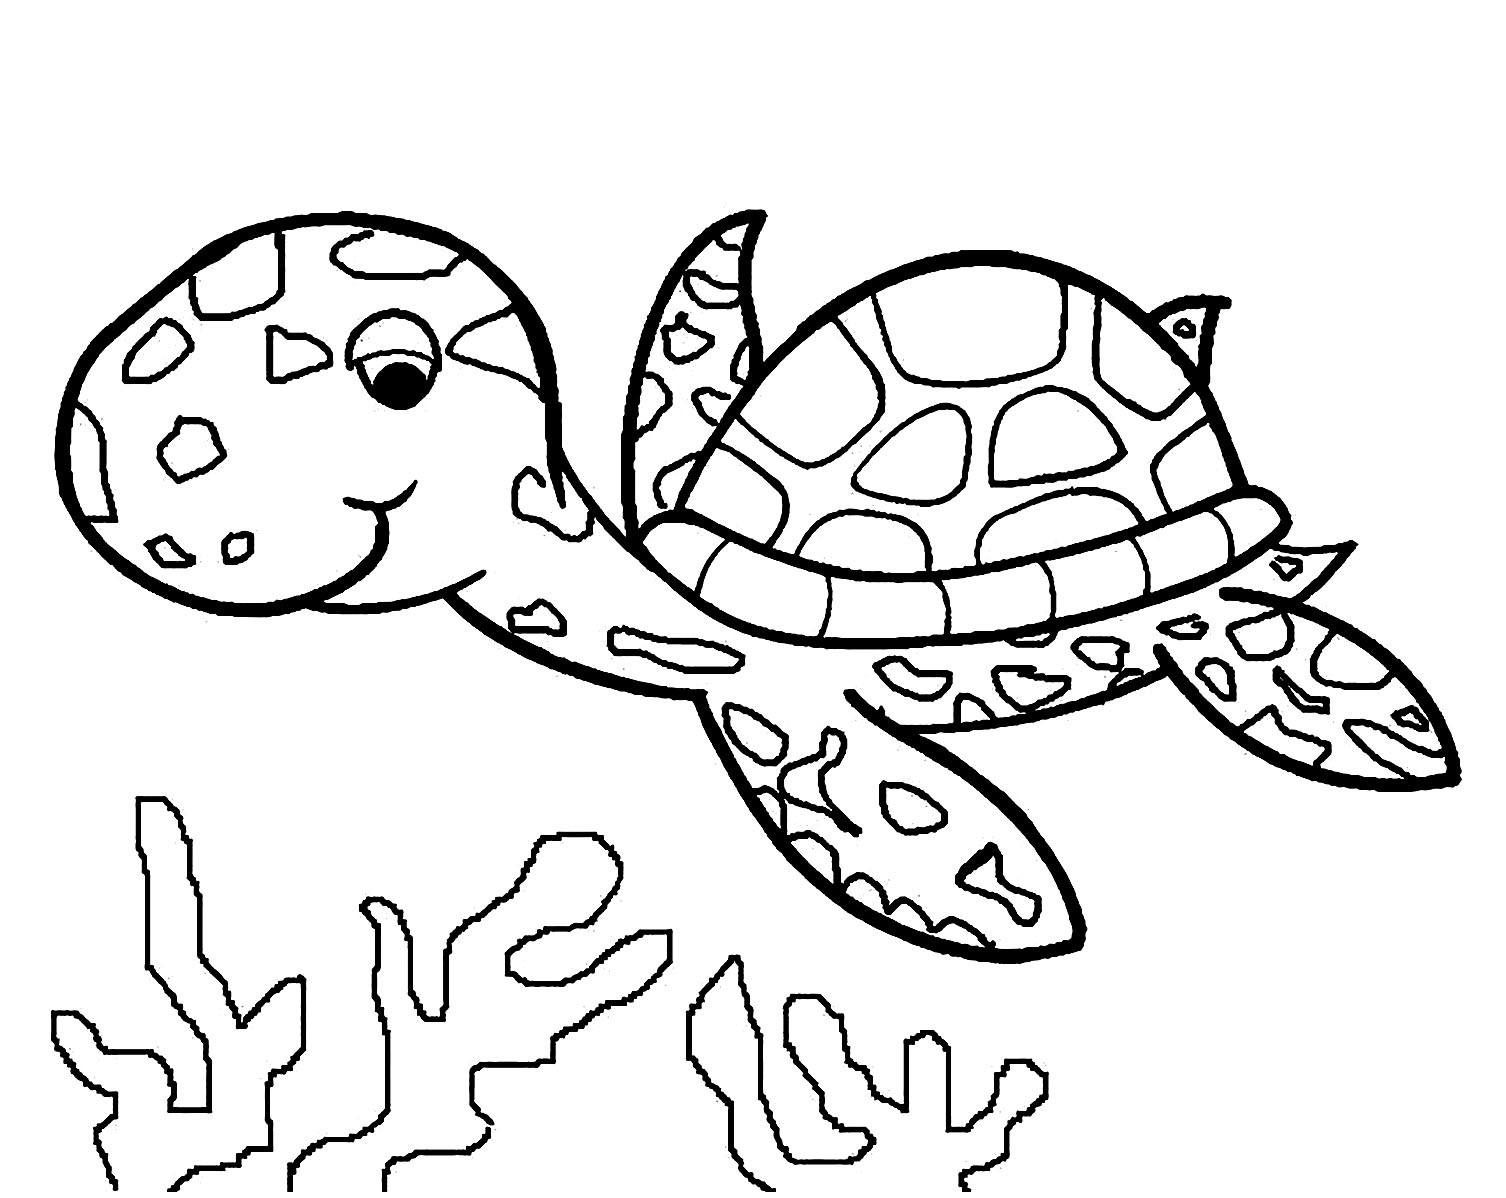 Coloring Sheets For Children
 Turtles to print Turtles Kids Coloring Pages